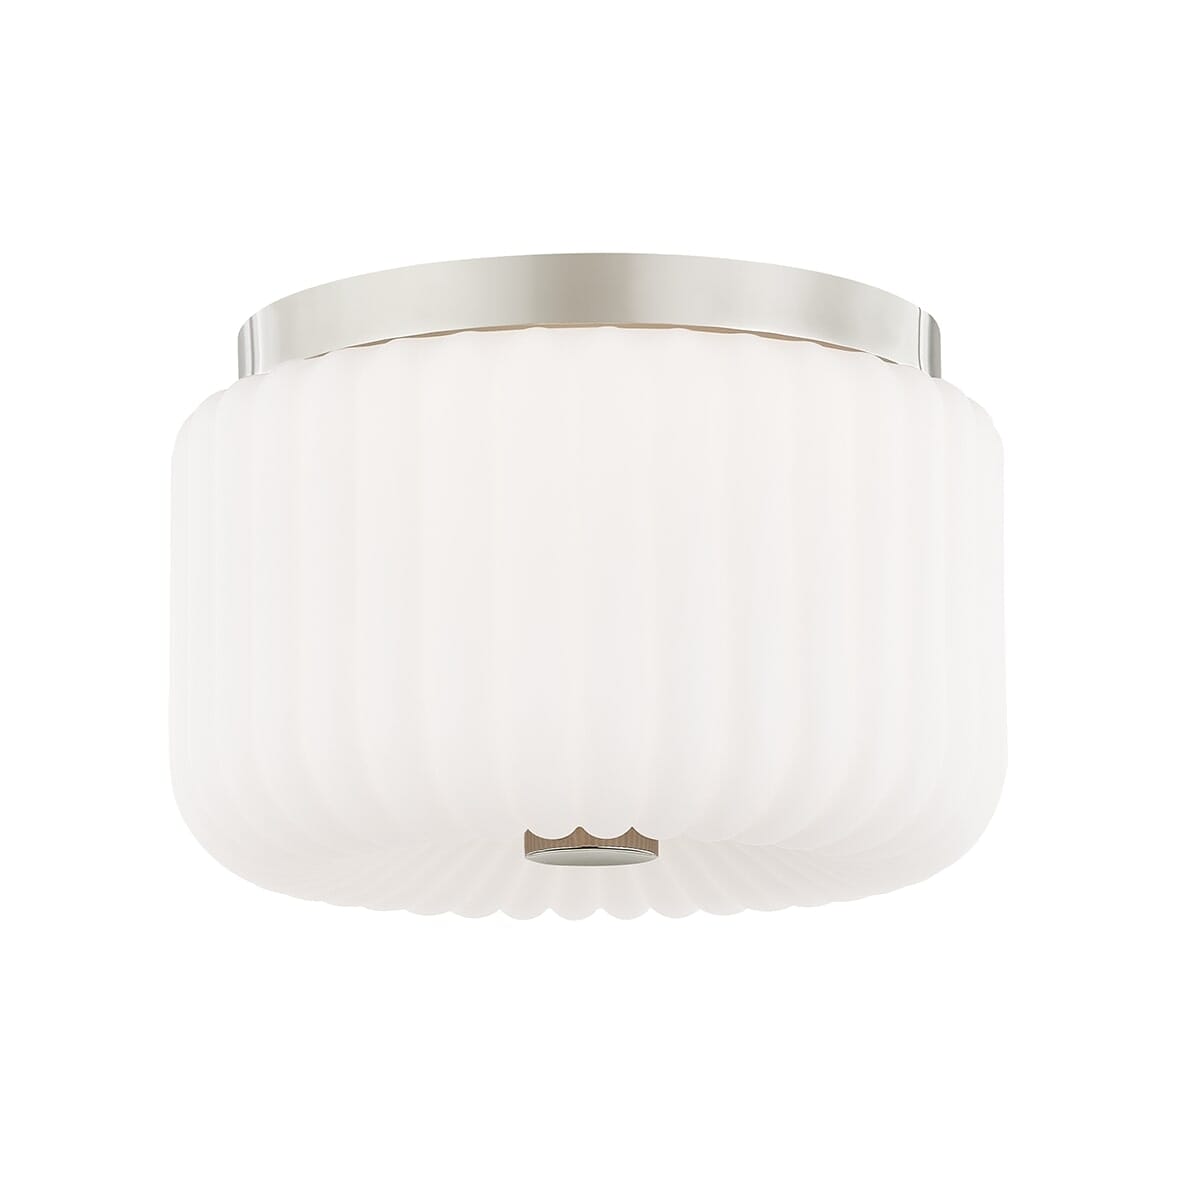 Mitzi Lydia 2-Light Ceiling Light in Polished Nickel